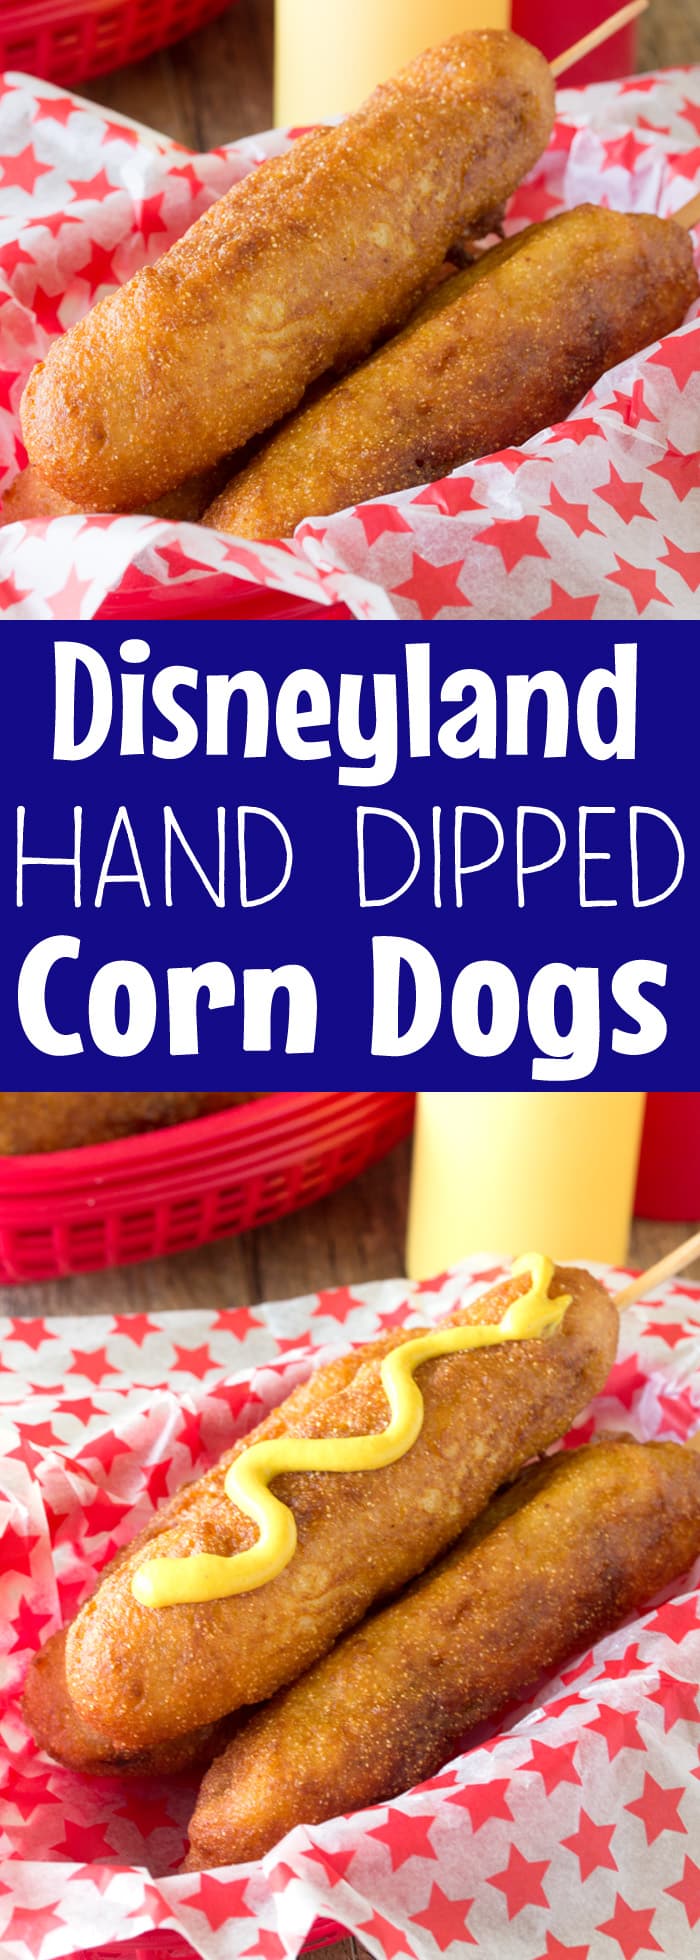 These Hand Dipped Corn Dogs are covered with a thick cornbread coating and fried to golden Disneyland Style Hand Dipped Corn Dogs